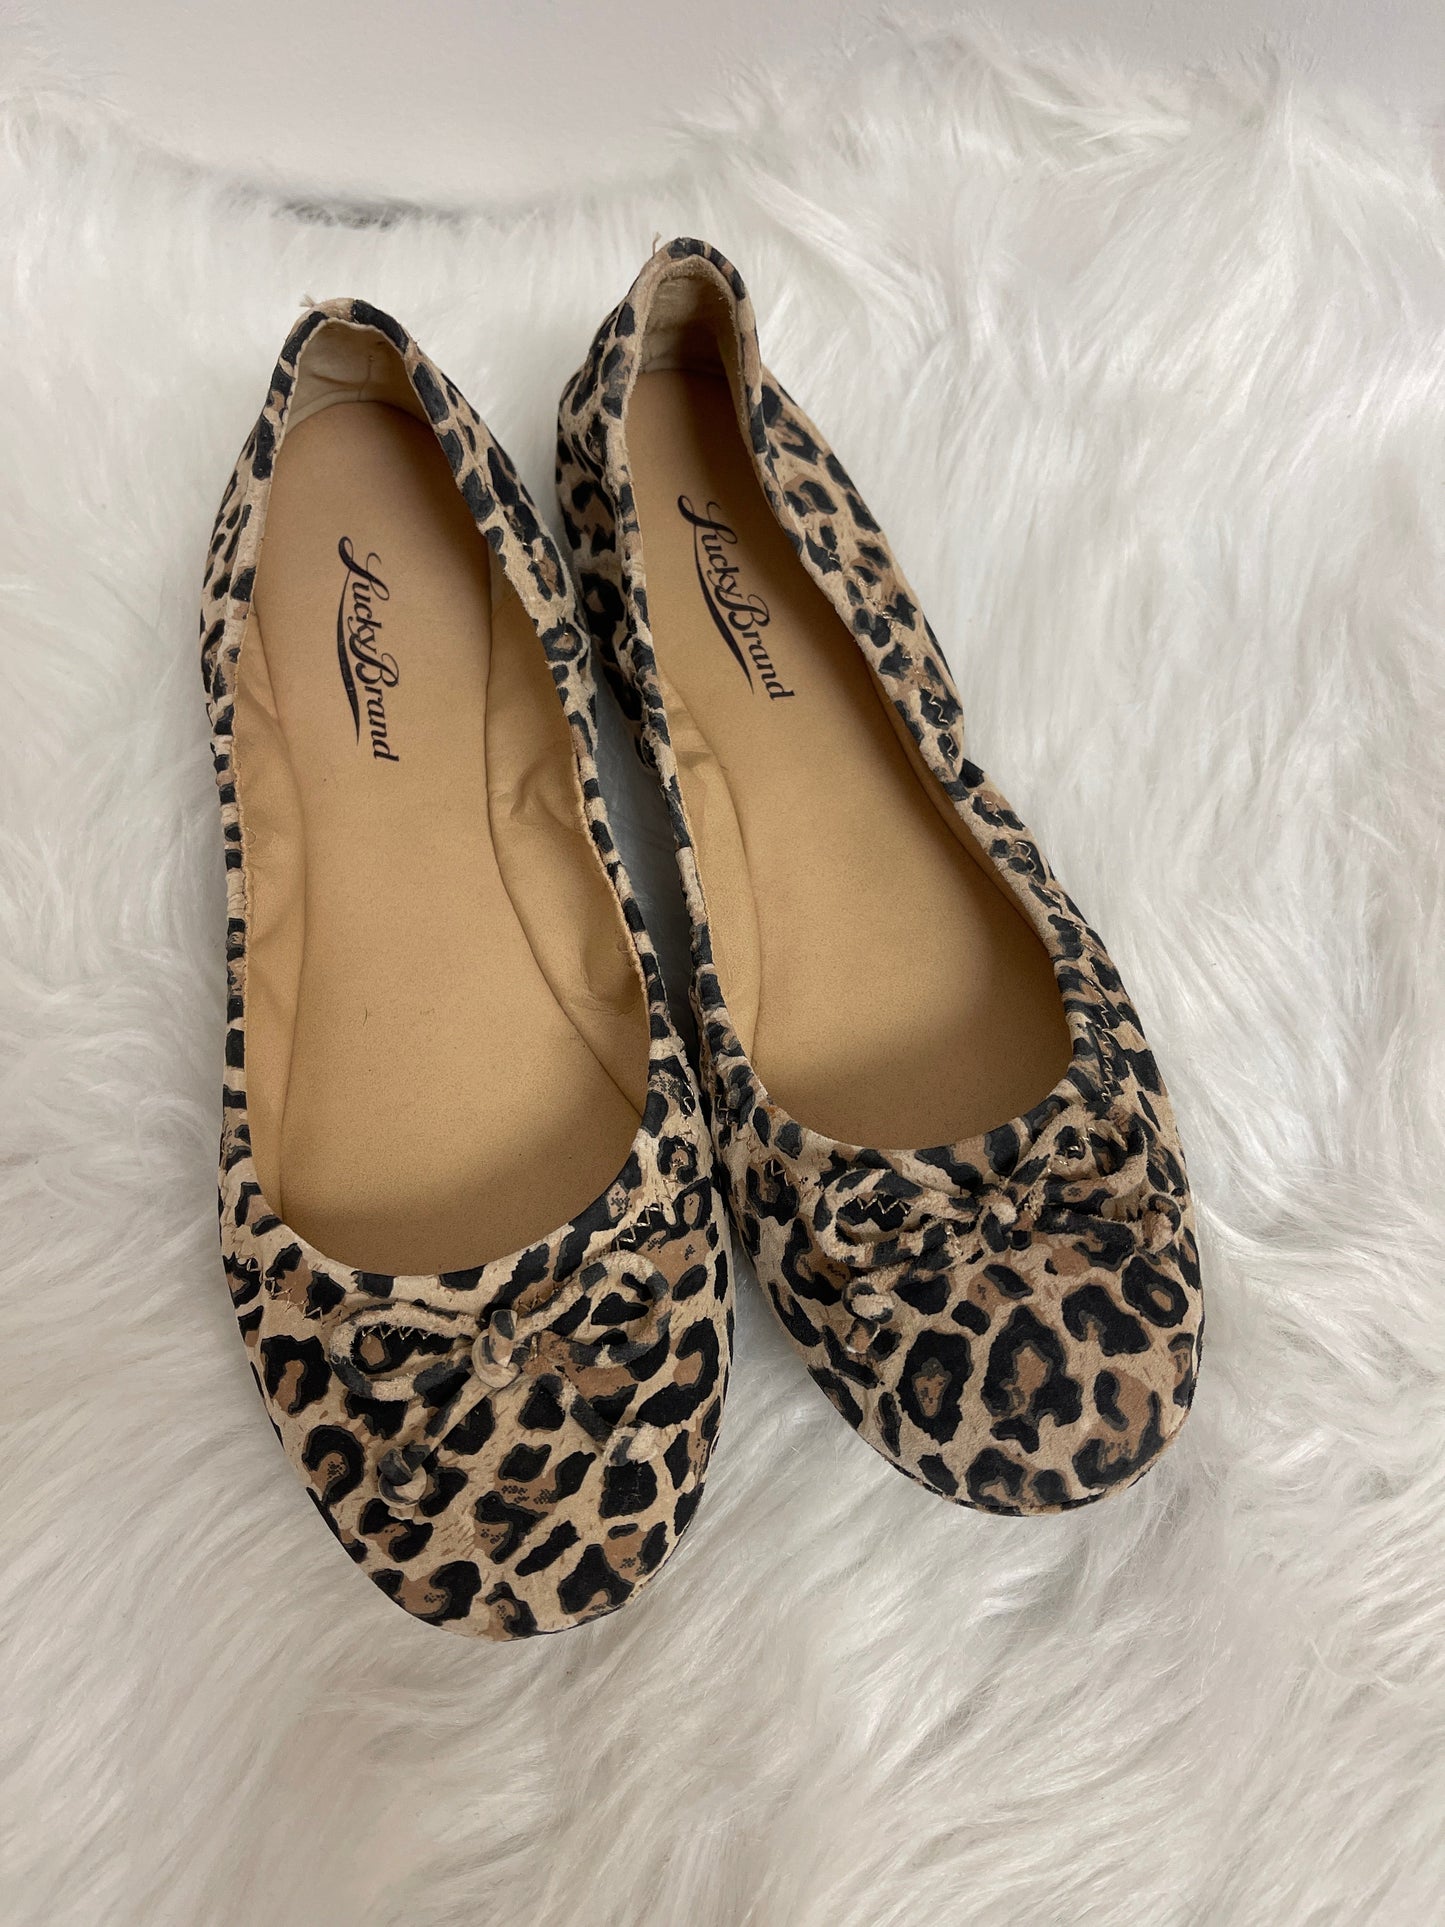 Animal Print Shoes Flats Lucky Brand, Size 7.5